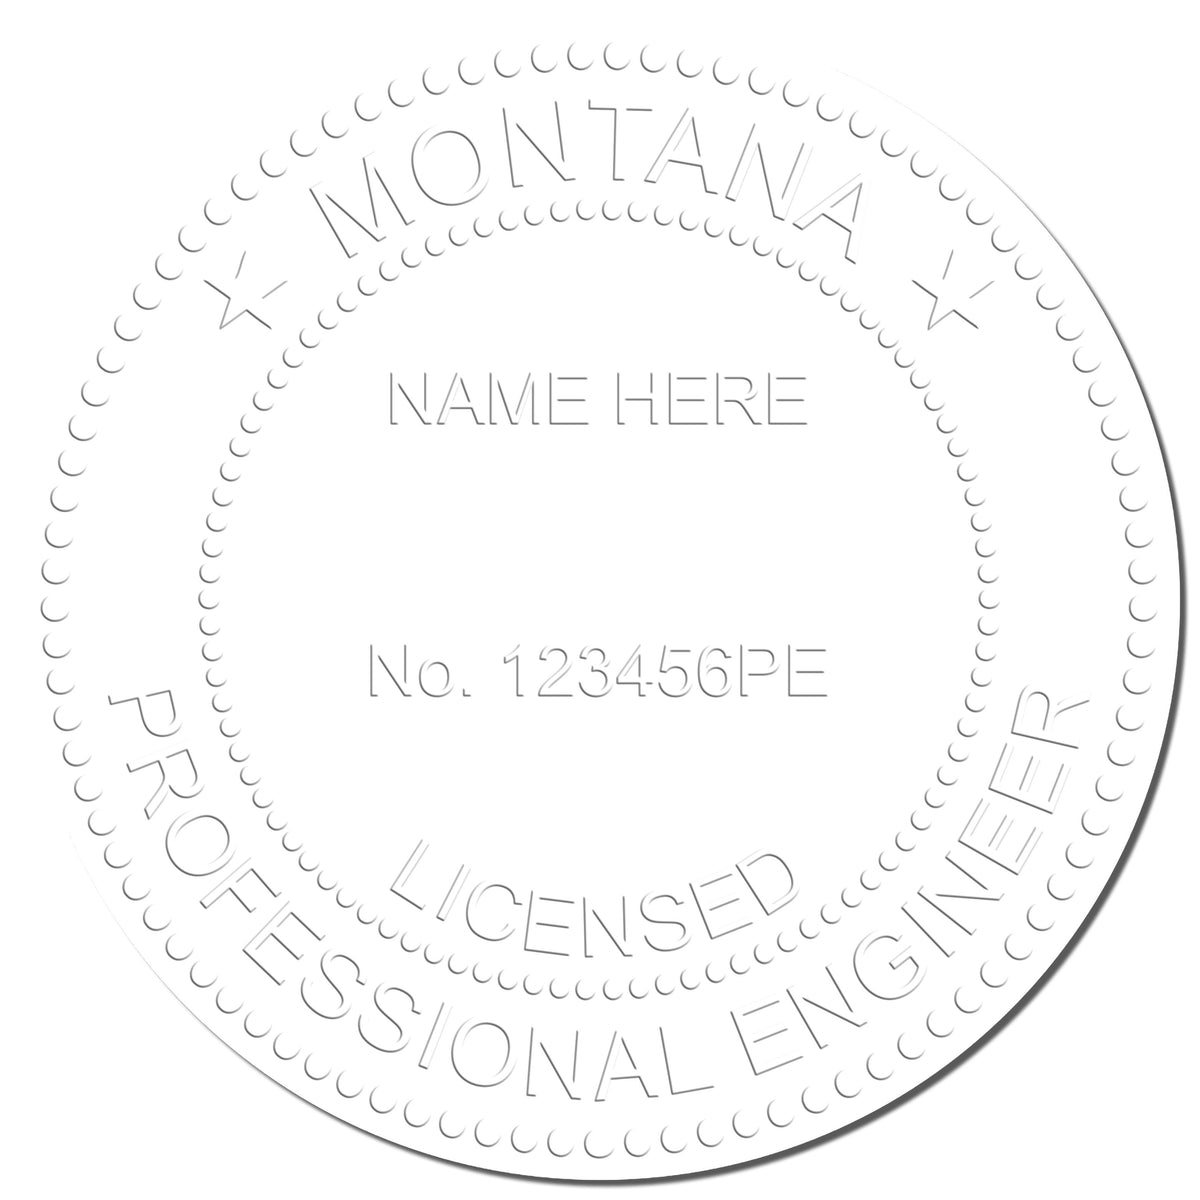 The Long Reach Montana PE Seal stamp impression comes to life with a crisp, detailed photo on paper - showcasing true professional quality.